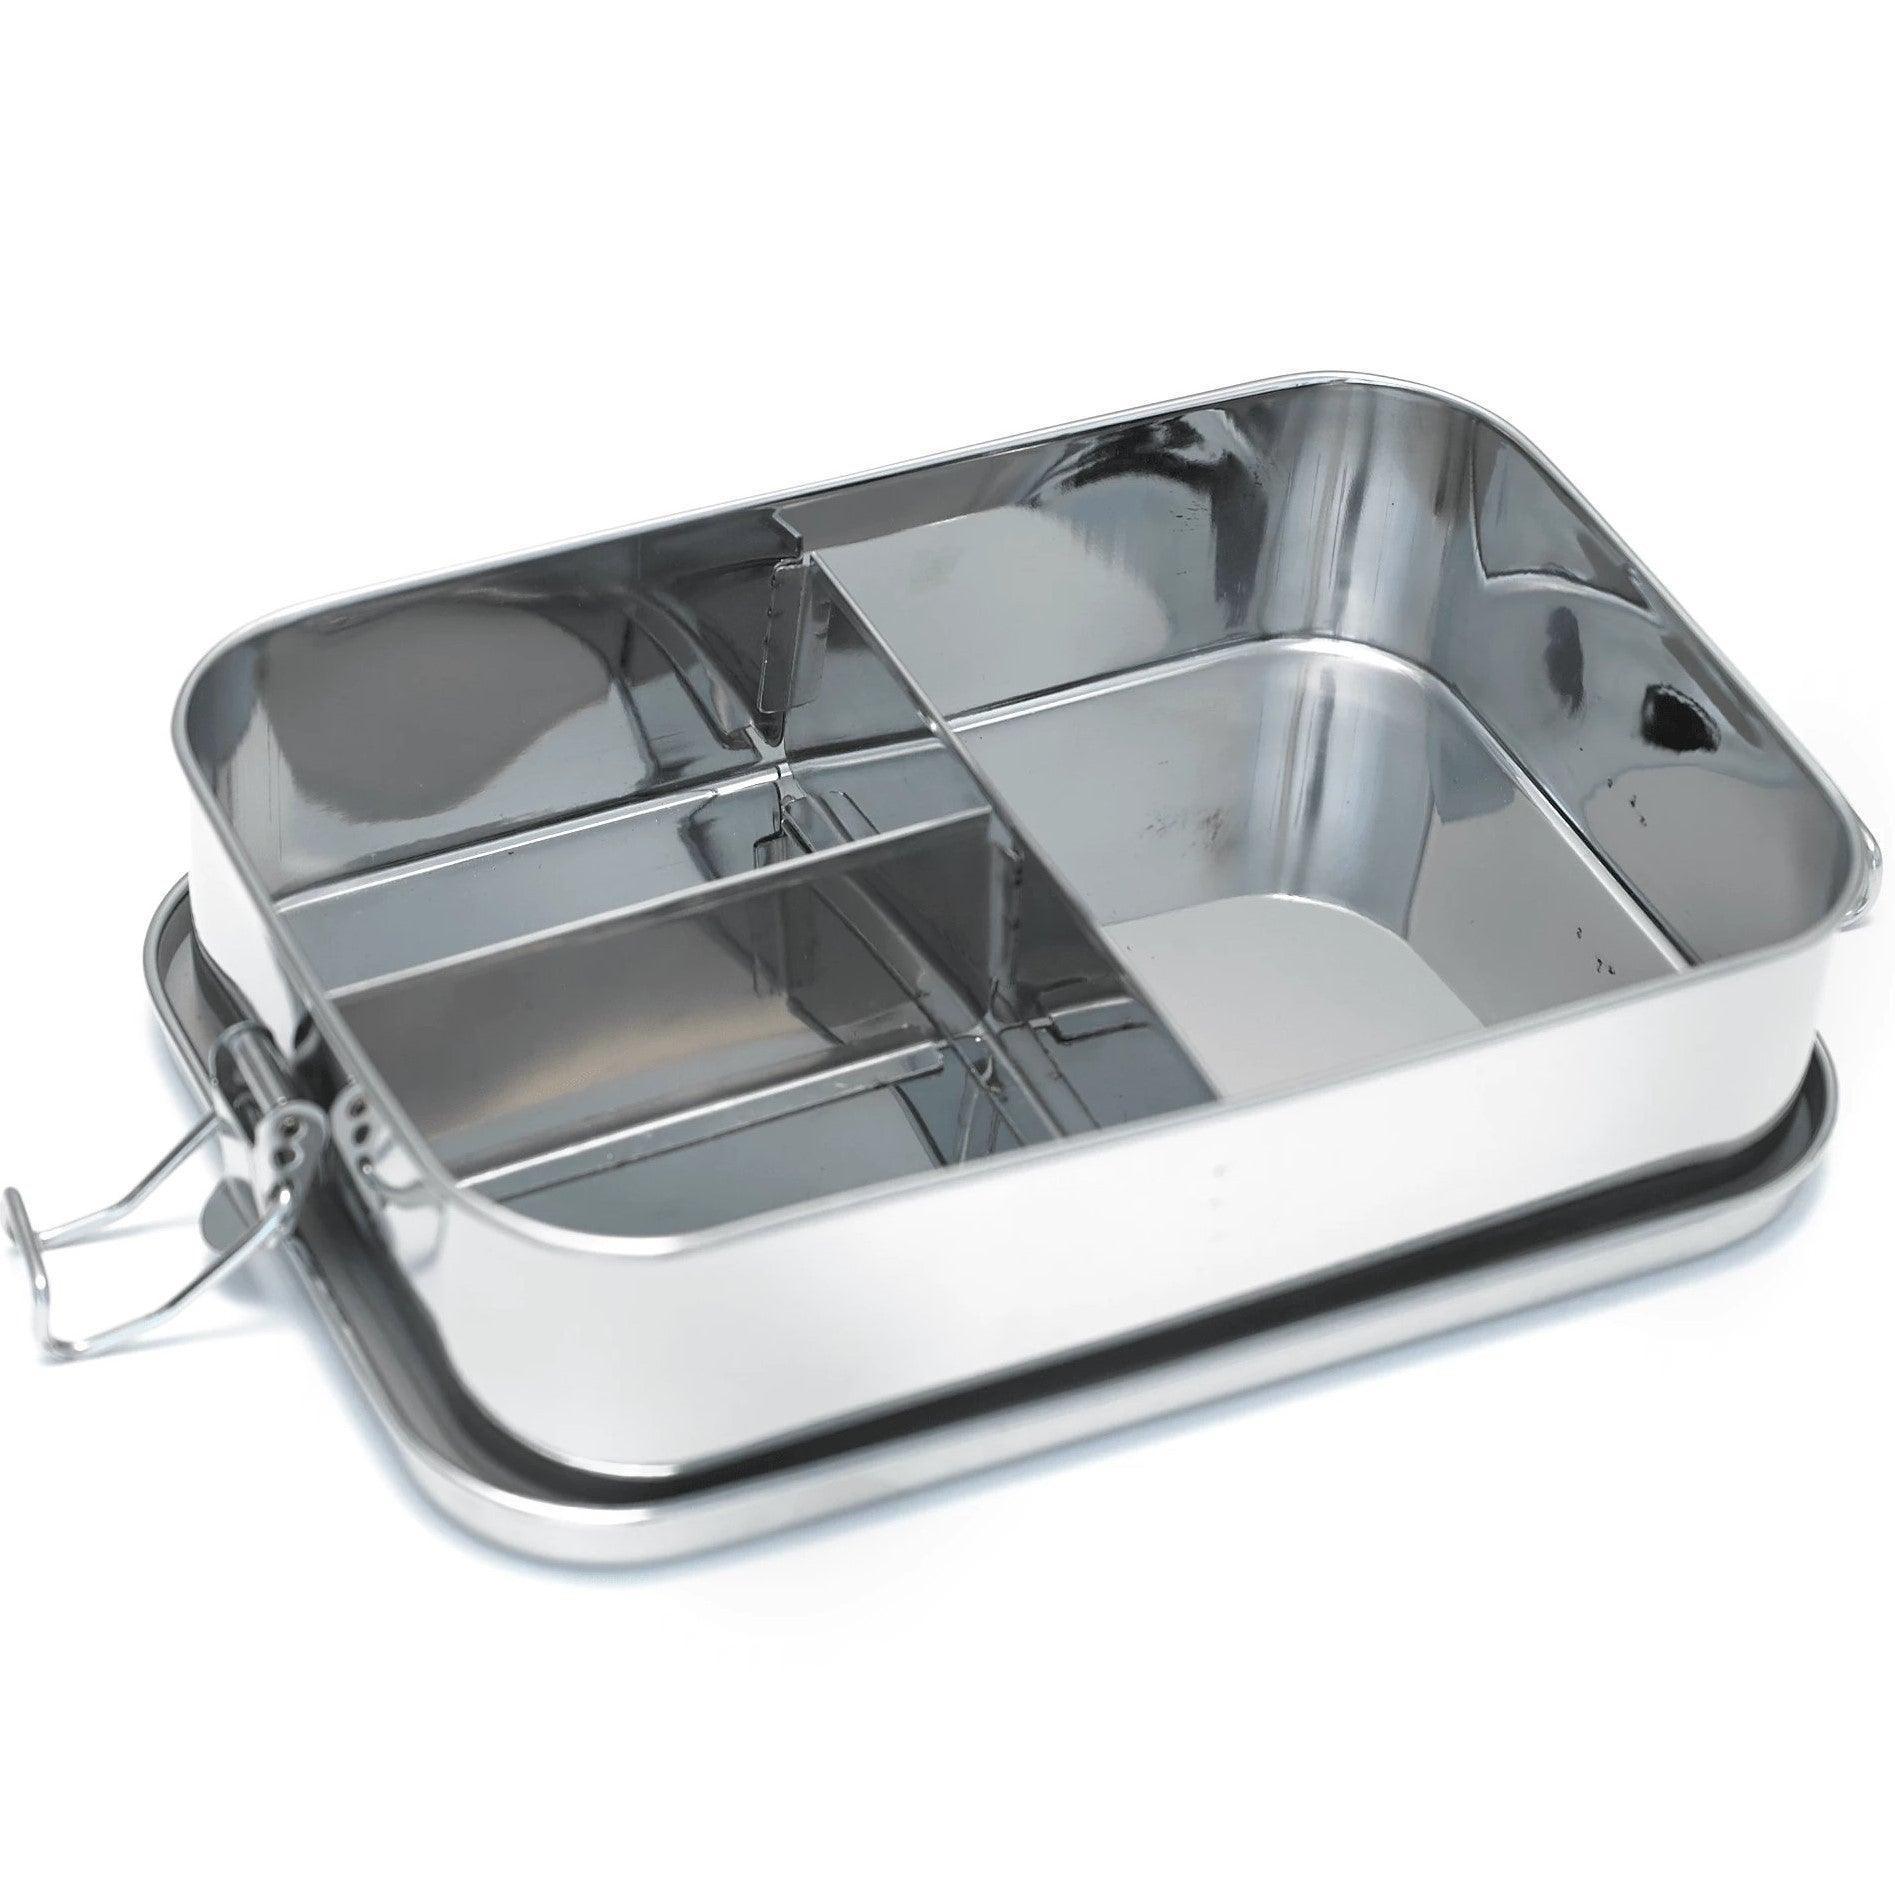 Leakproof Stainless Steel Bento Box | Stainless Steel - Meals In Steel 